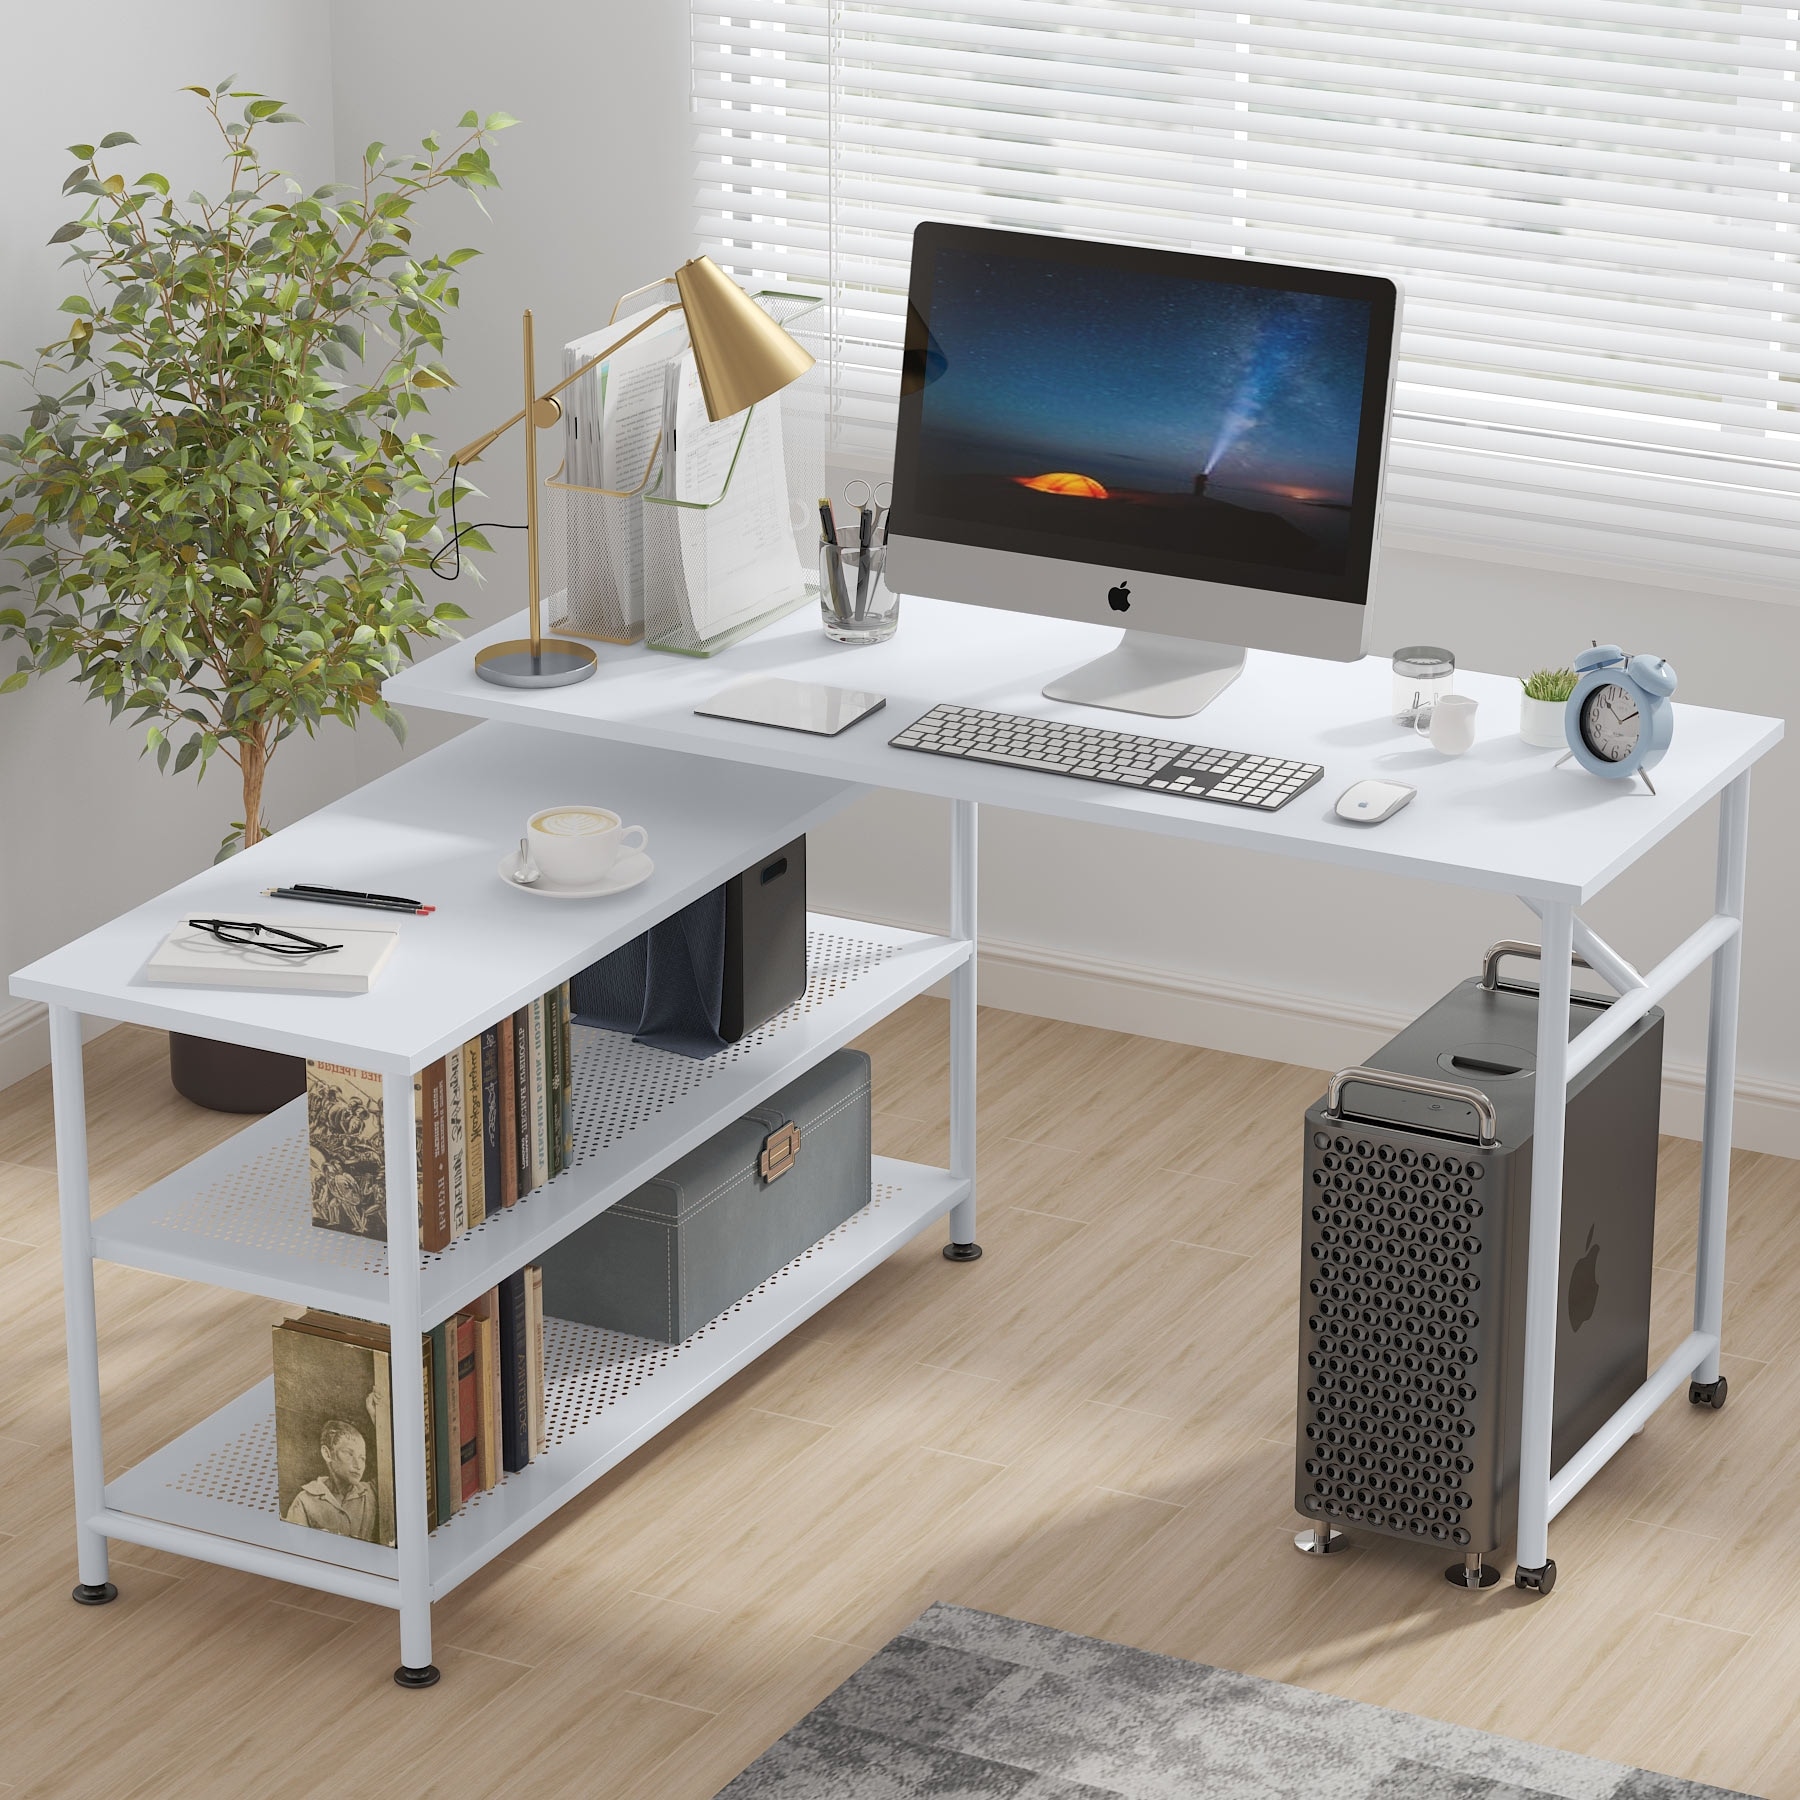 https://ak1.ostkcdn.com/images/products/is/images/direct/8df2fef9f28454427dcf6dca6745ed9412e9f523/Folding-Computer-Desk-with-Storage-Shelves%2C-360-Rotating-L-Shape-Corner-Desk%2C-Large-PC-Gaming-Desk-for-Home-Office-Small-Space.jpg